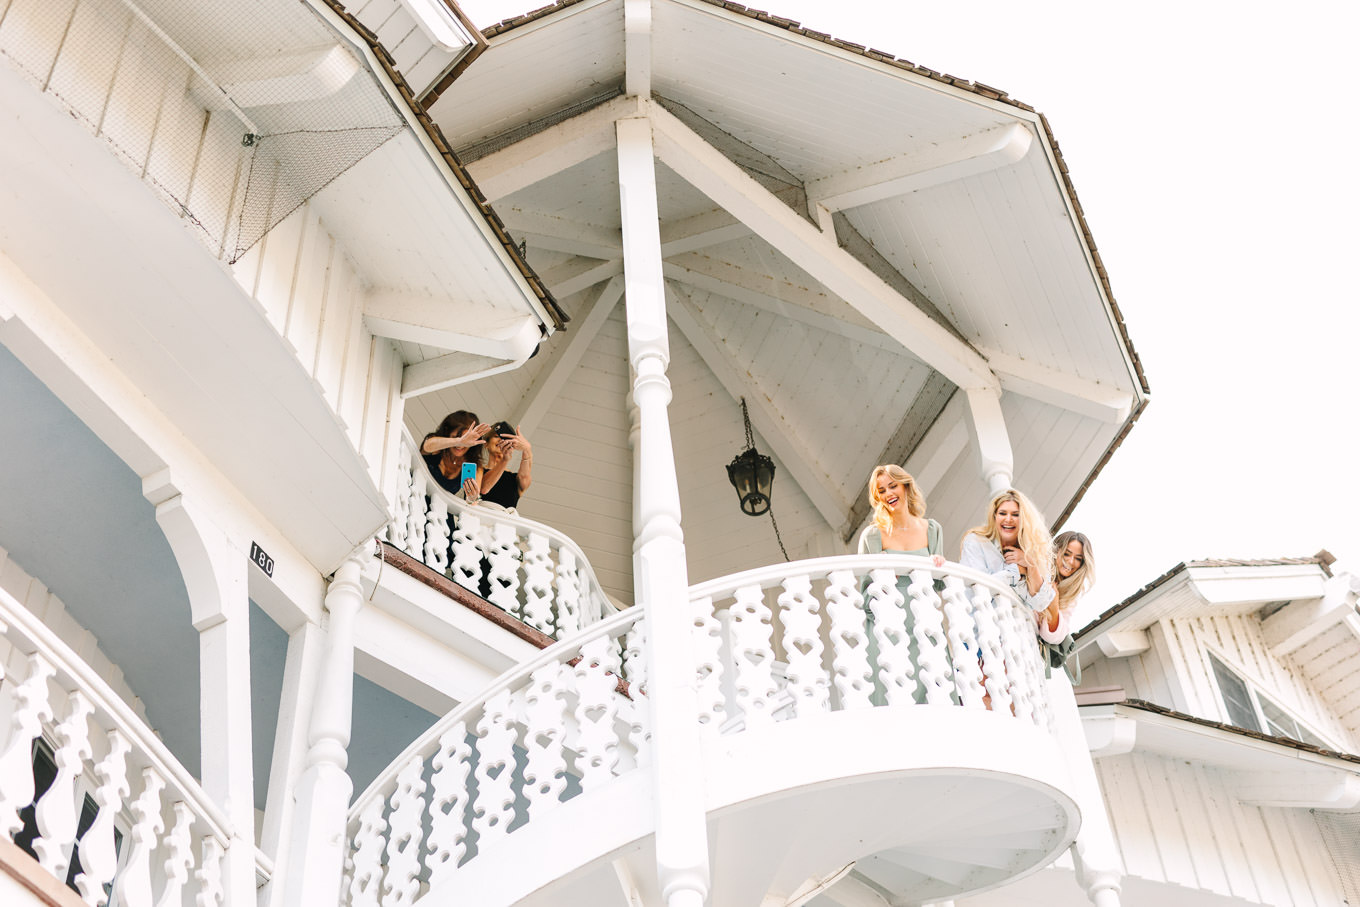 First look with Allison Harvard and Jeremy Burke at the Madonna Inn | Colorful and quirky wedding at Higuera Ranch in San Luis Obispo | #sanluisobispowedding #californiawedding #higueraranch #madonnainn   
Source: Mary Costa Photography | Los Angeles